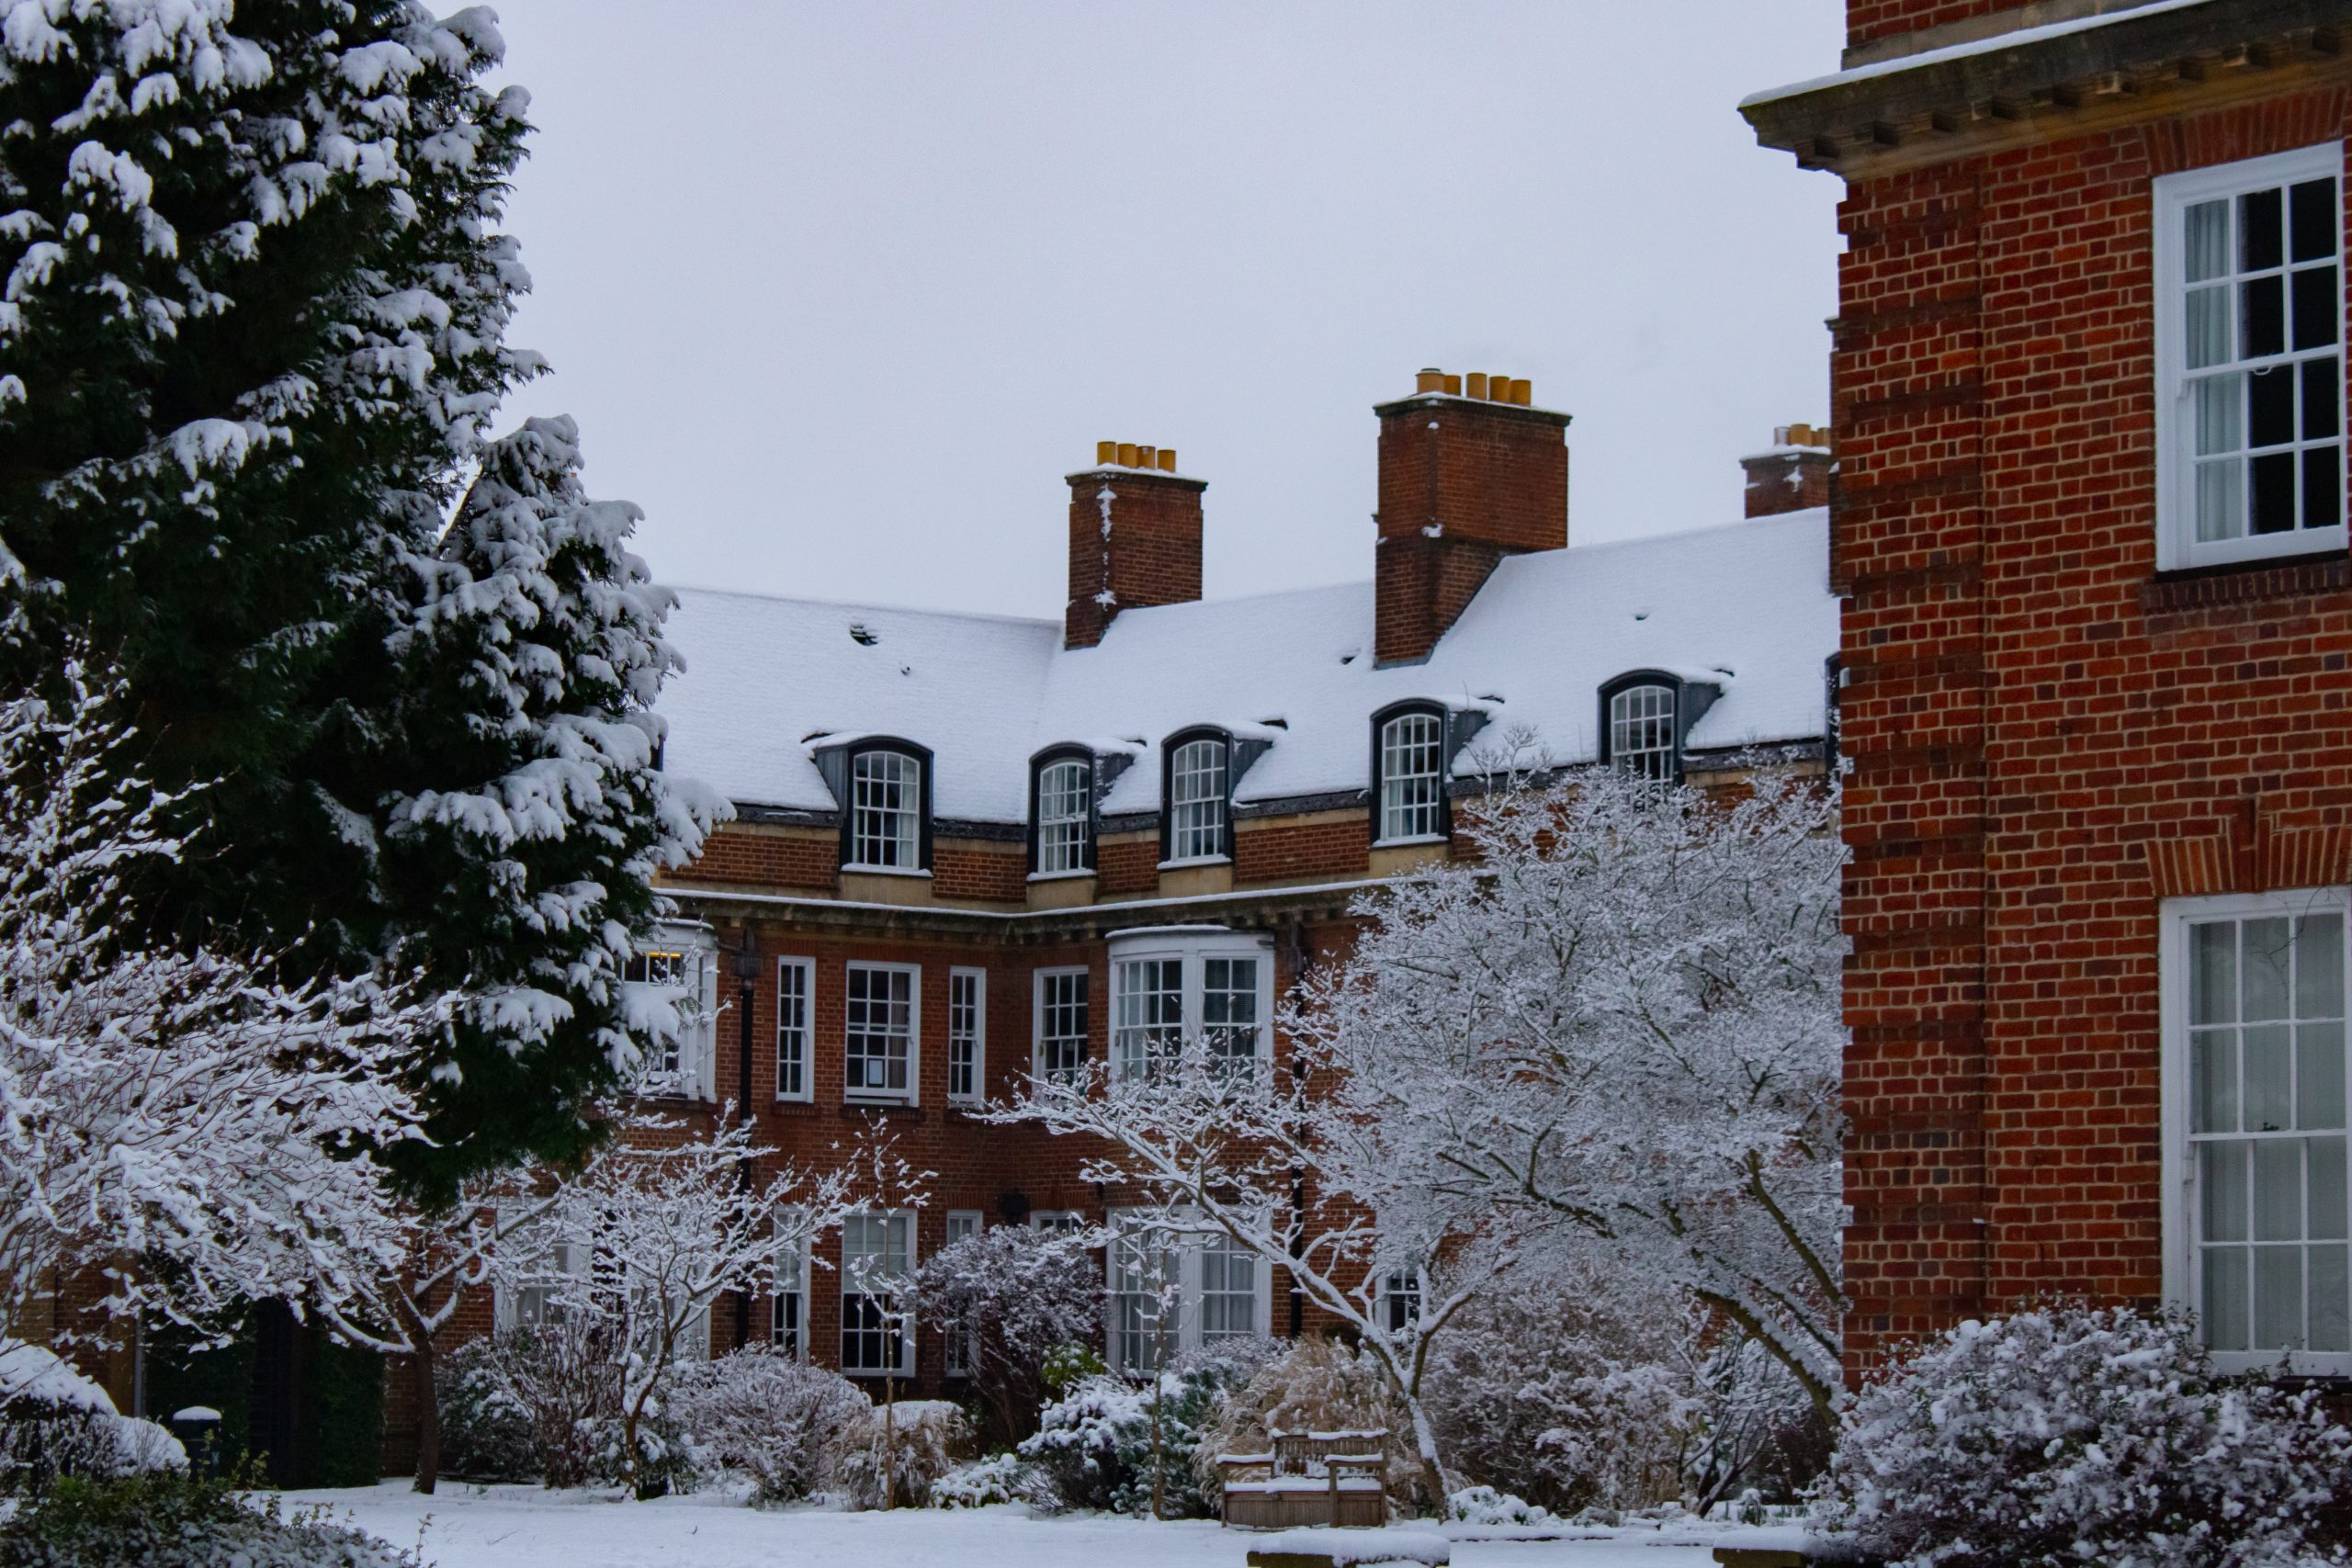 College gardens in the snow